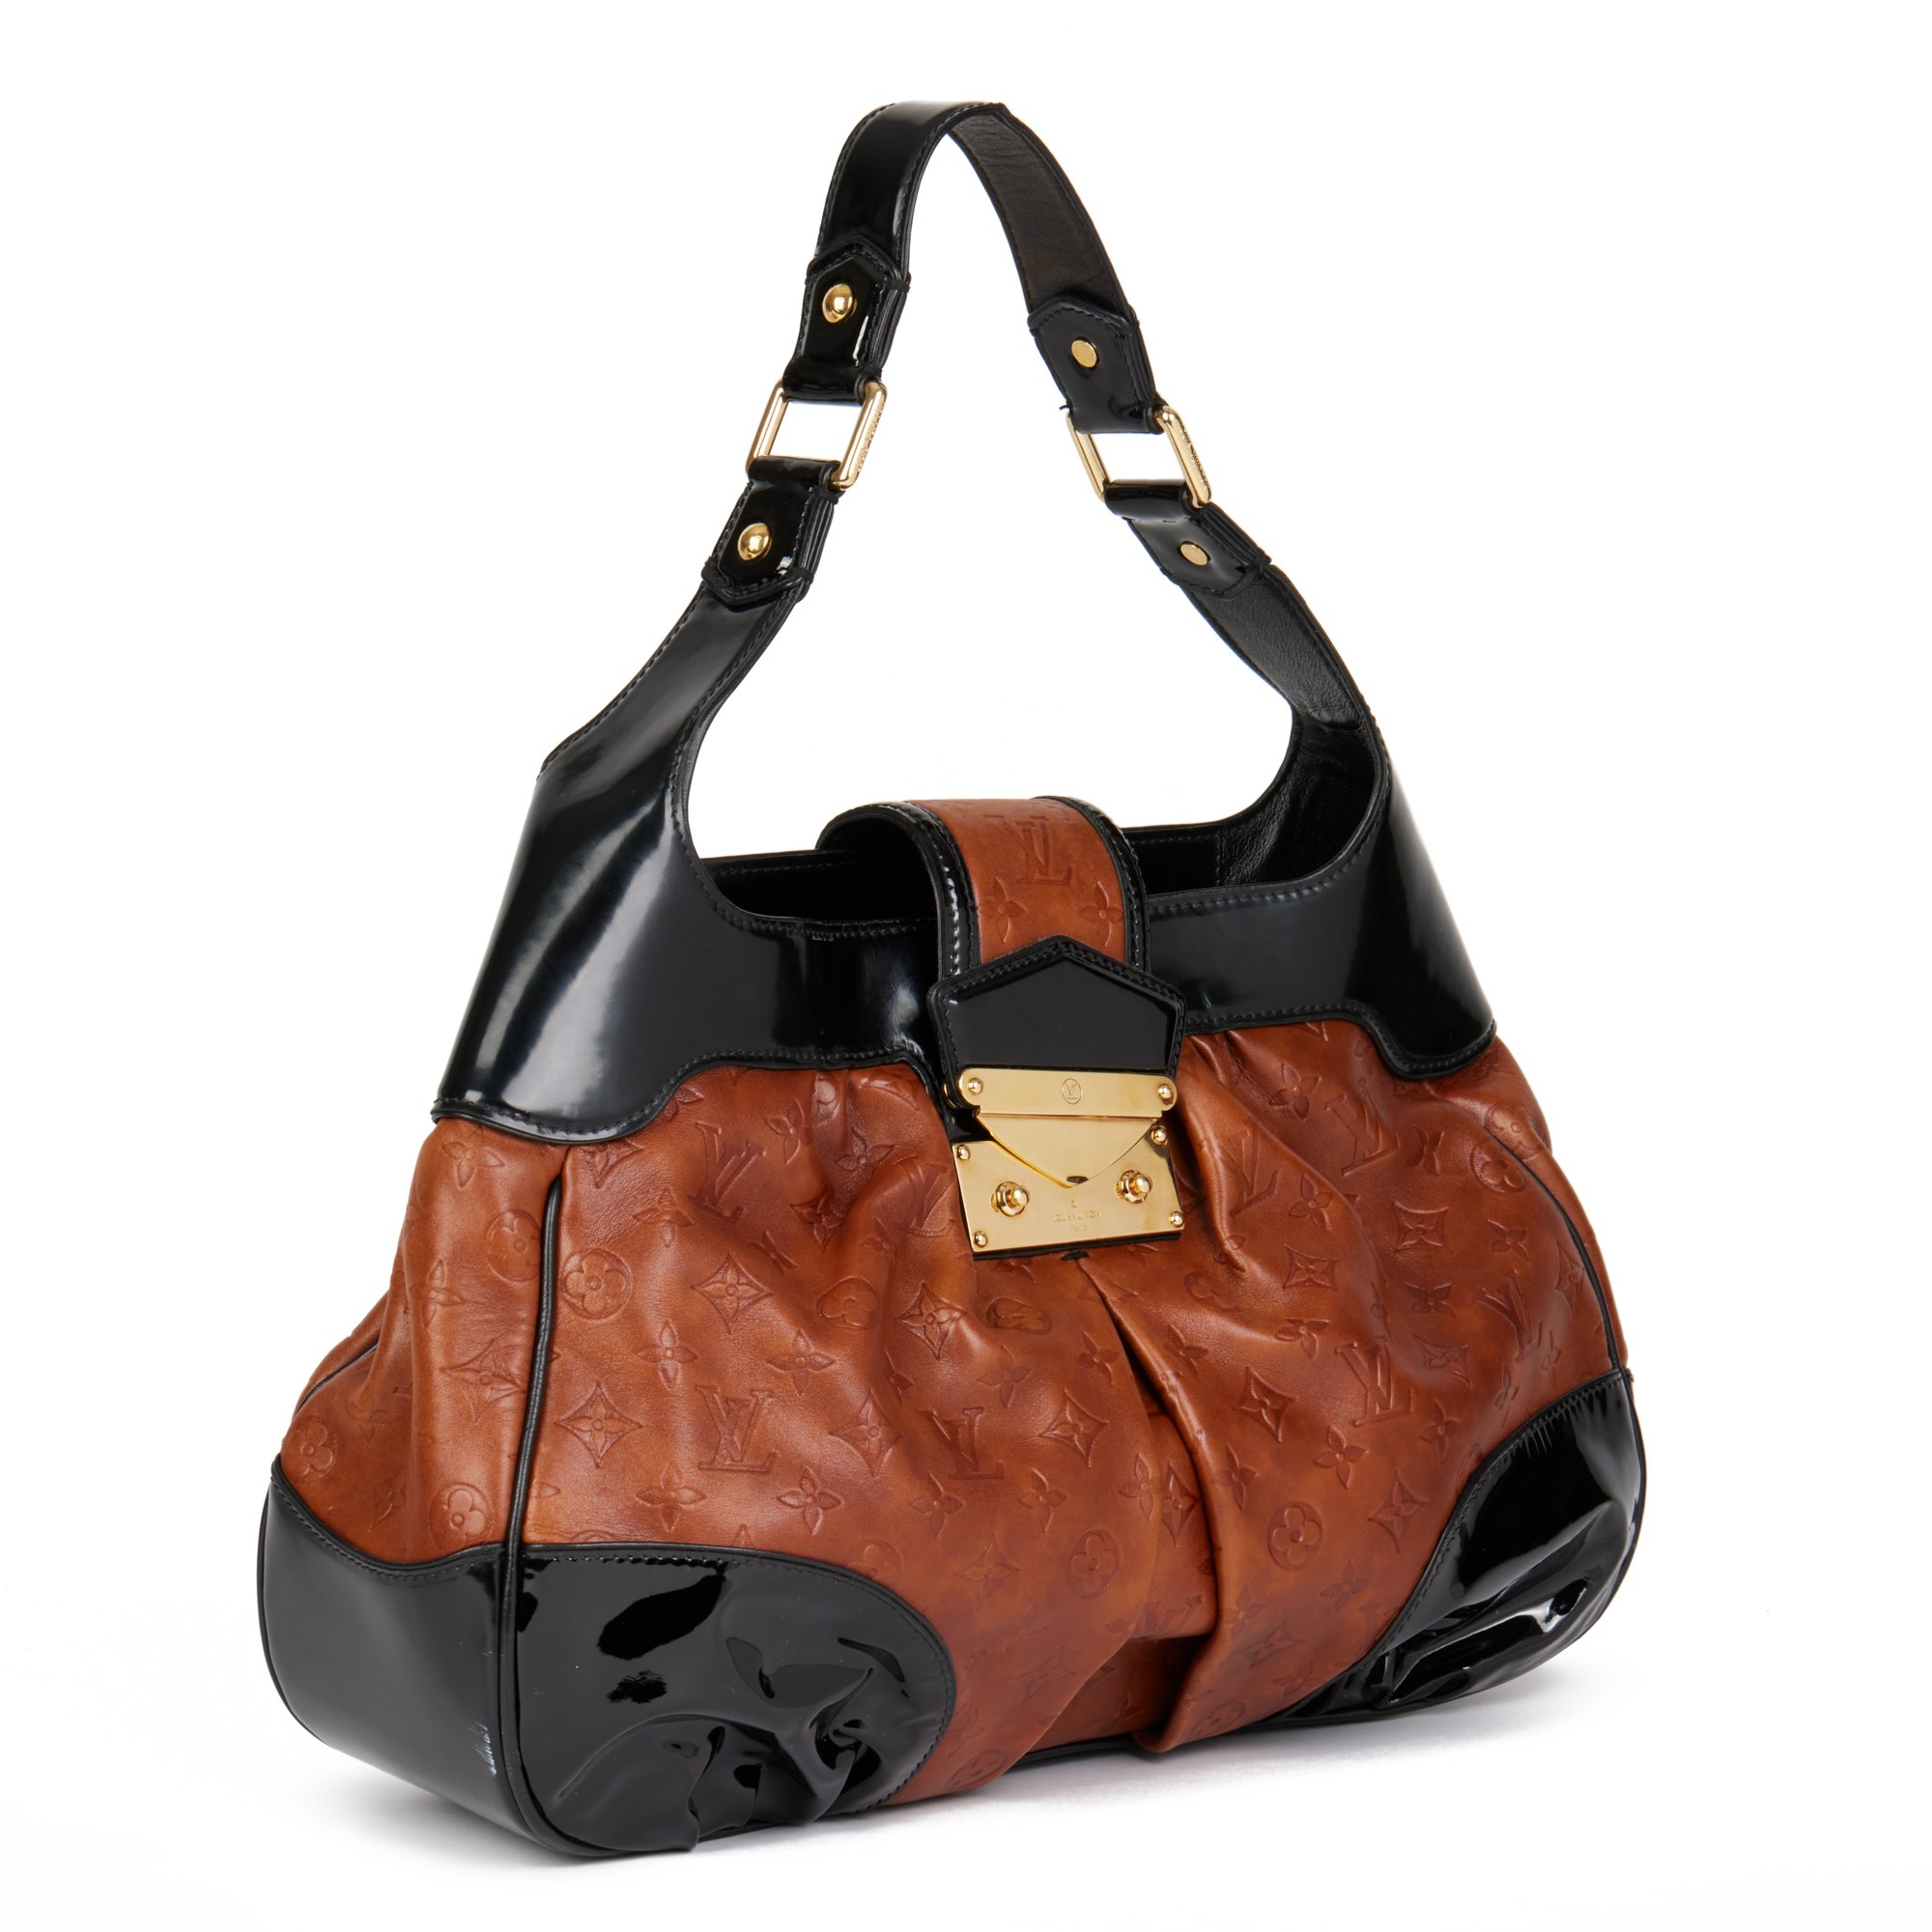 Louis Vuitton Black Patent Leather & Caramel Embossed Calfskin Leather Polly